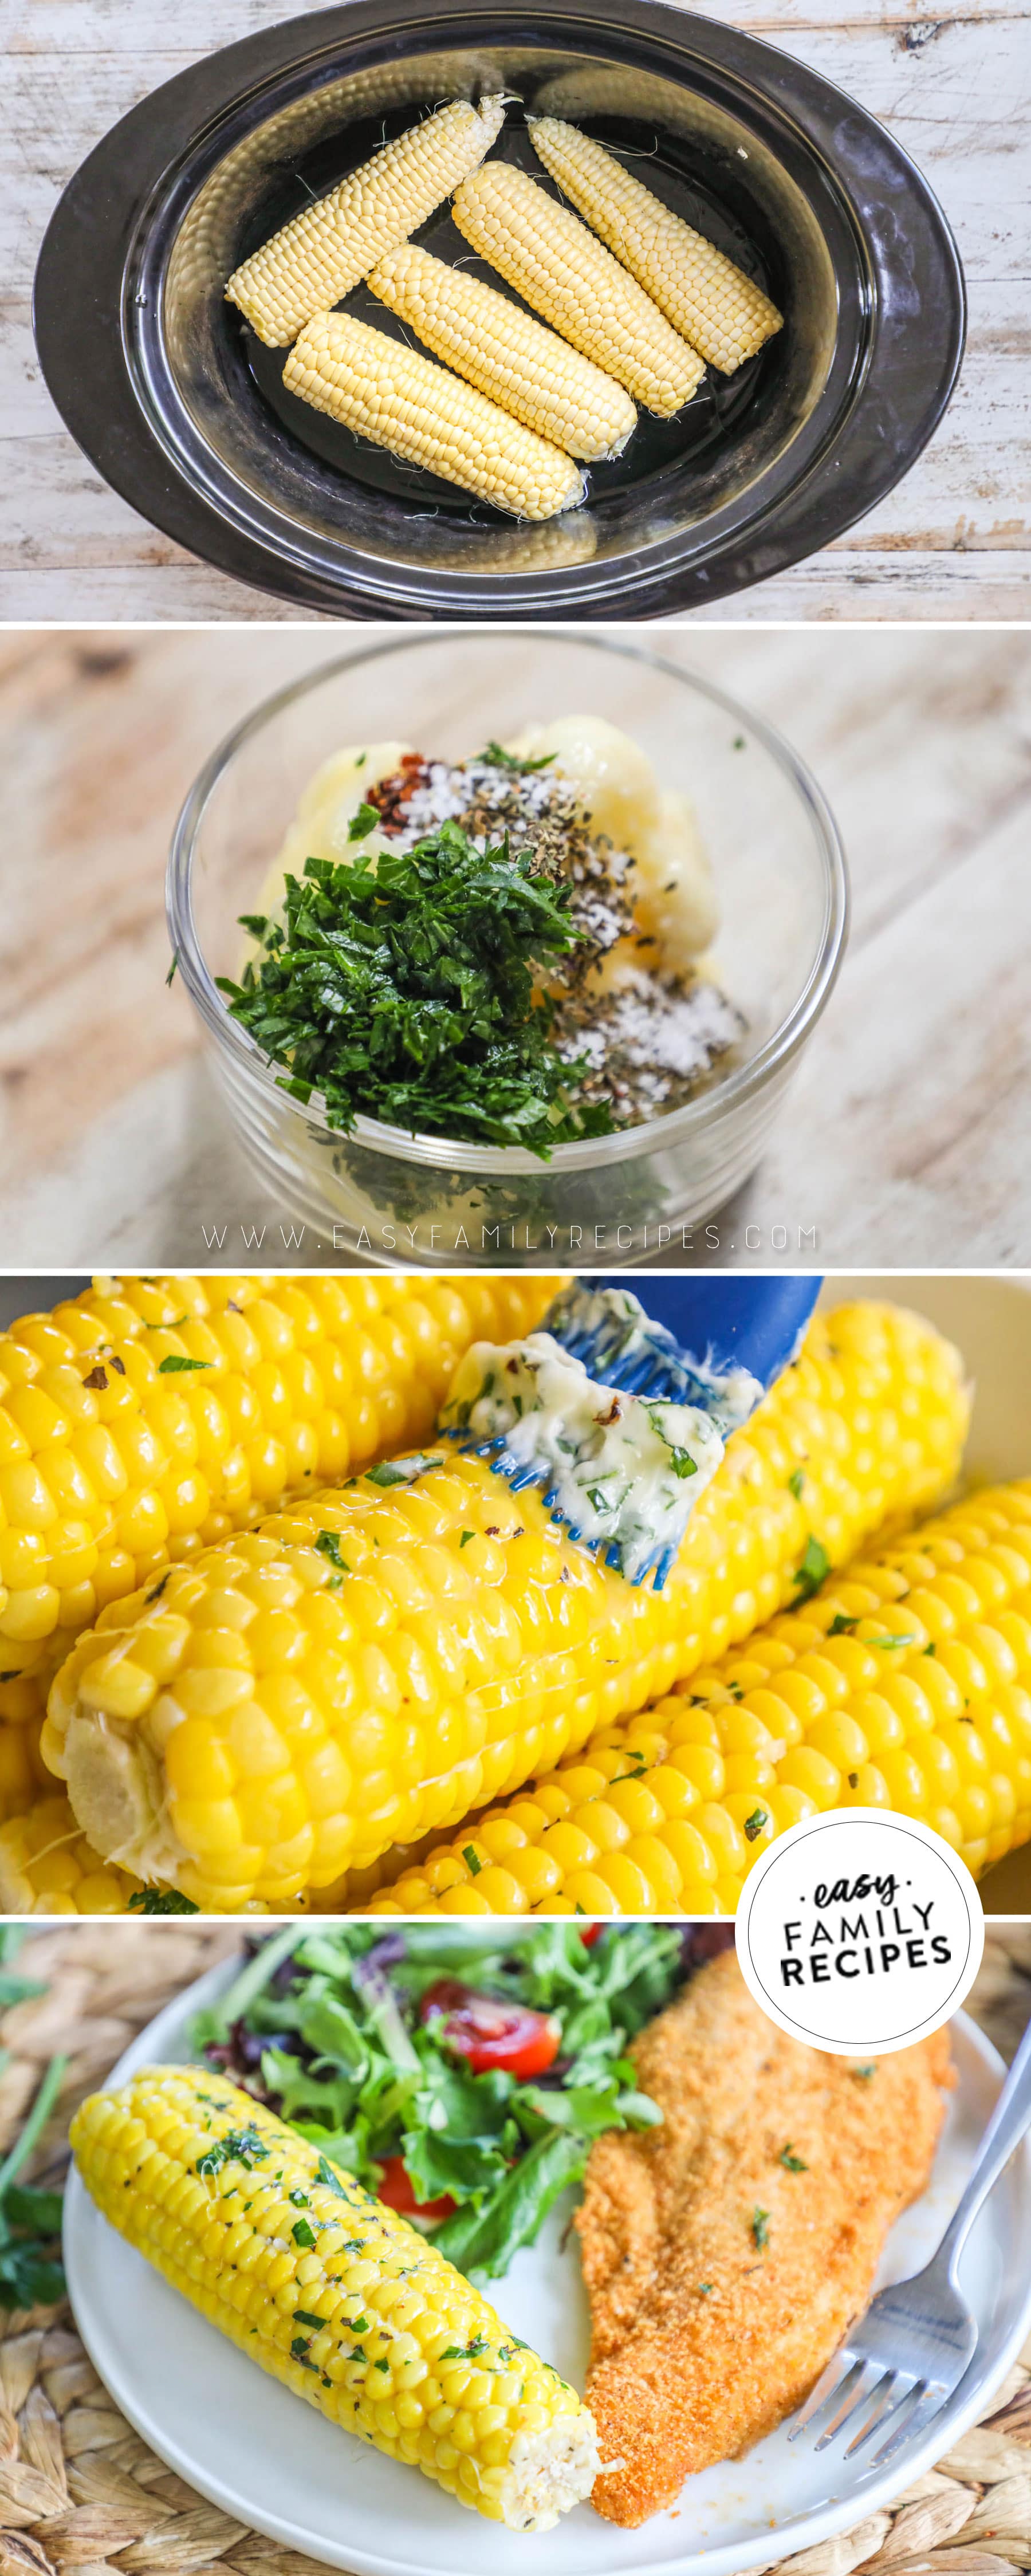 4 image collage of corn cobs in crock pot, garlic herb butter ingredients, and then the butter being brushed on, and then the corn on a plate served with a salad and fish.